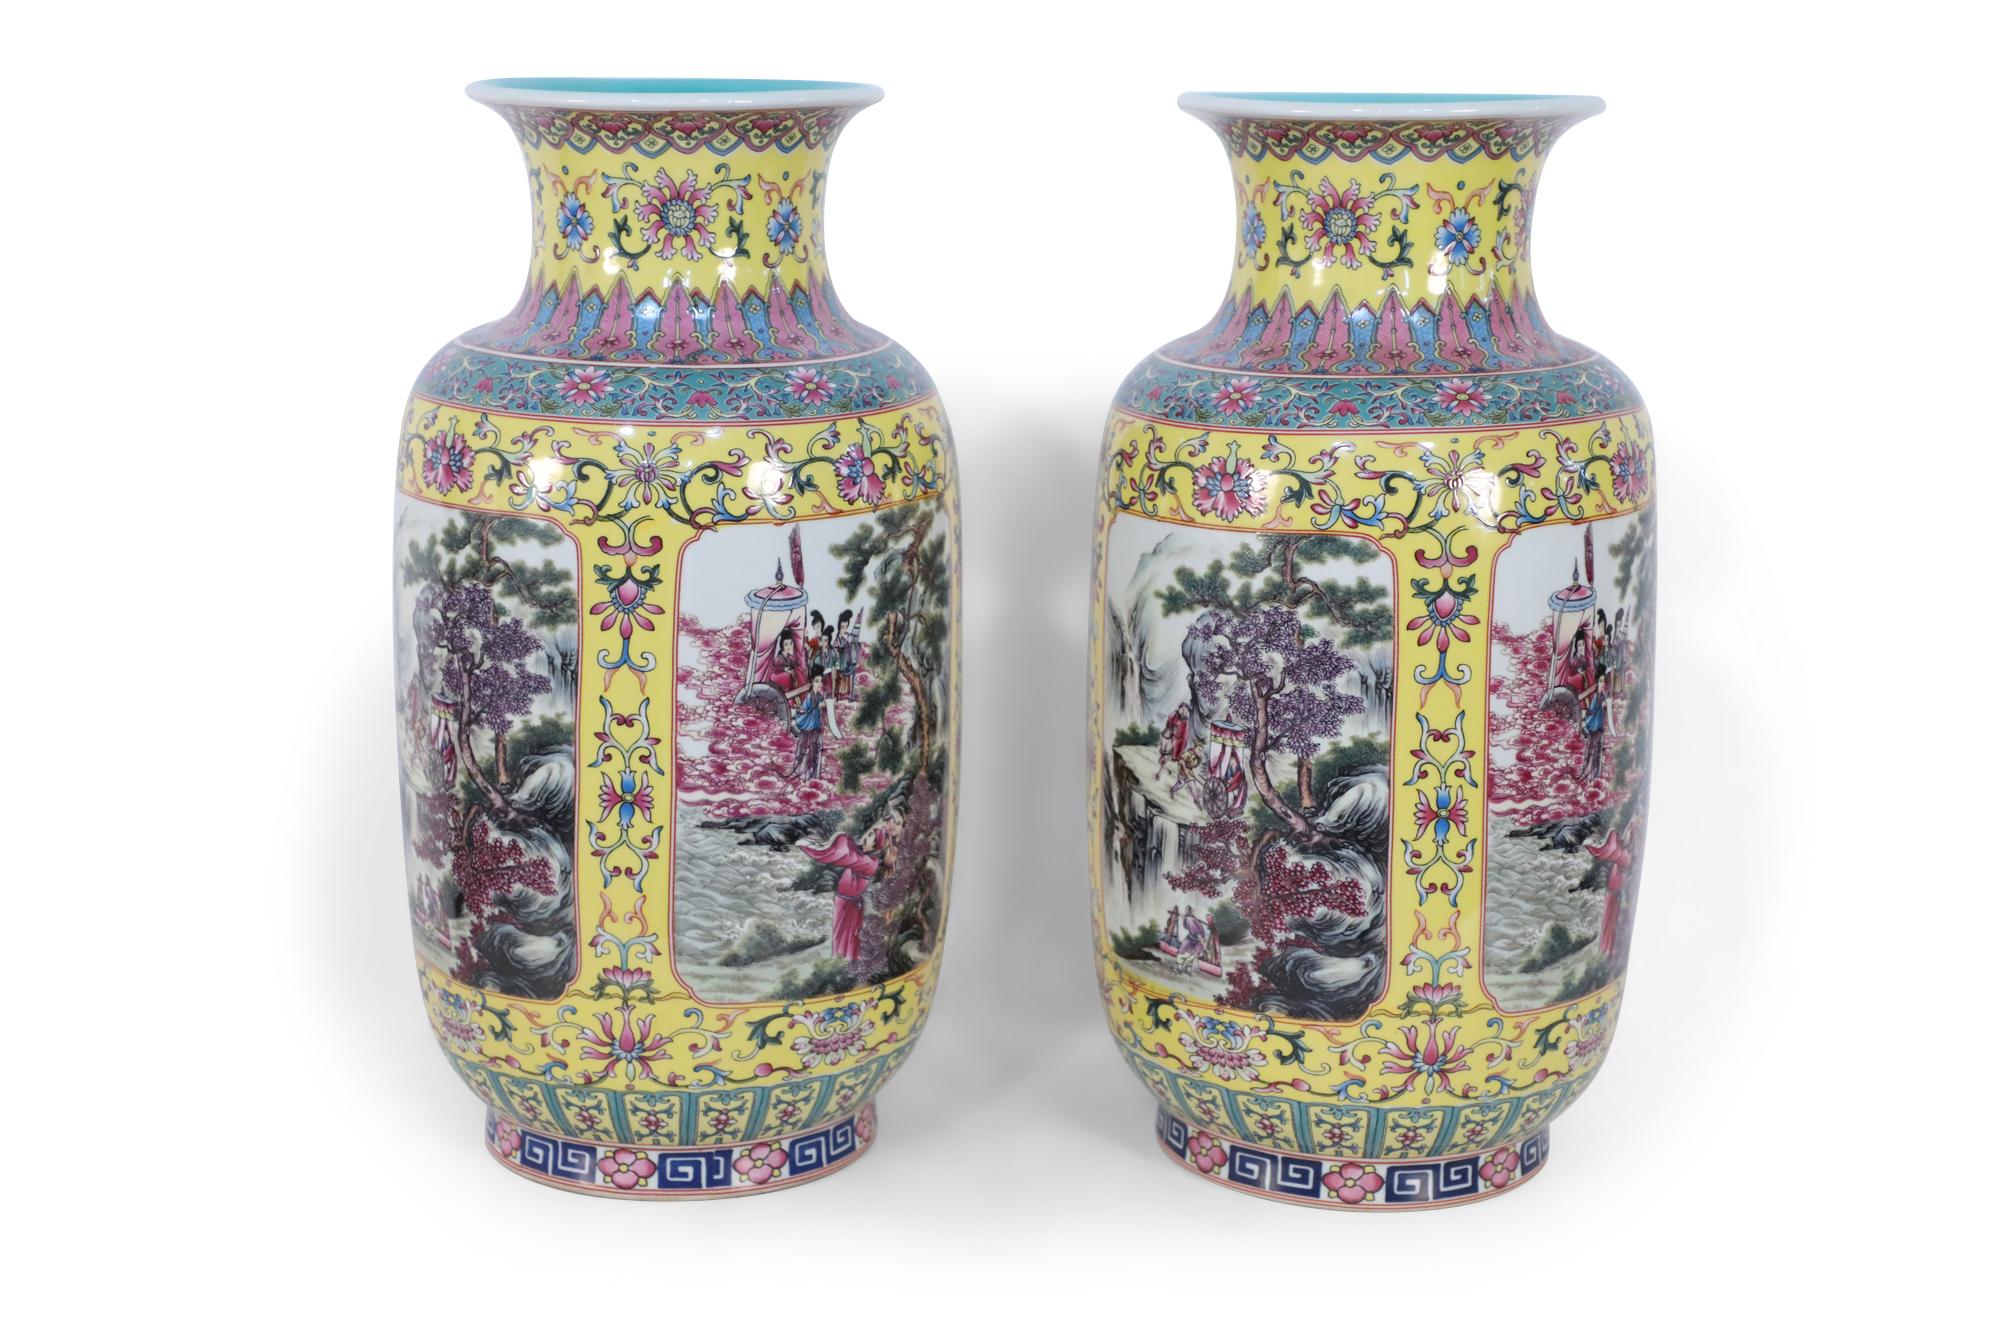 Pair of Chinese Yellow and Turquoise Genre Vignette Porcelain Vases 1